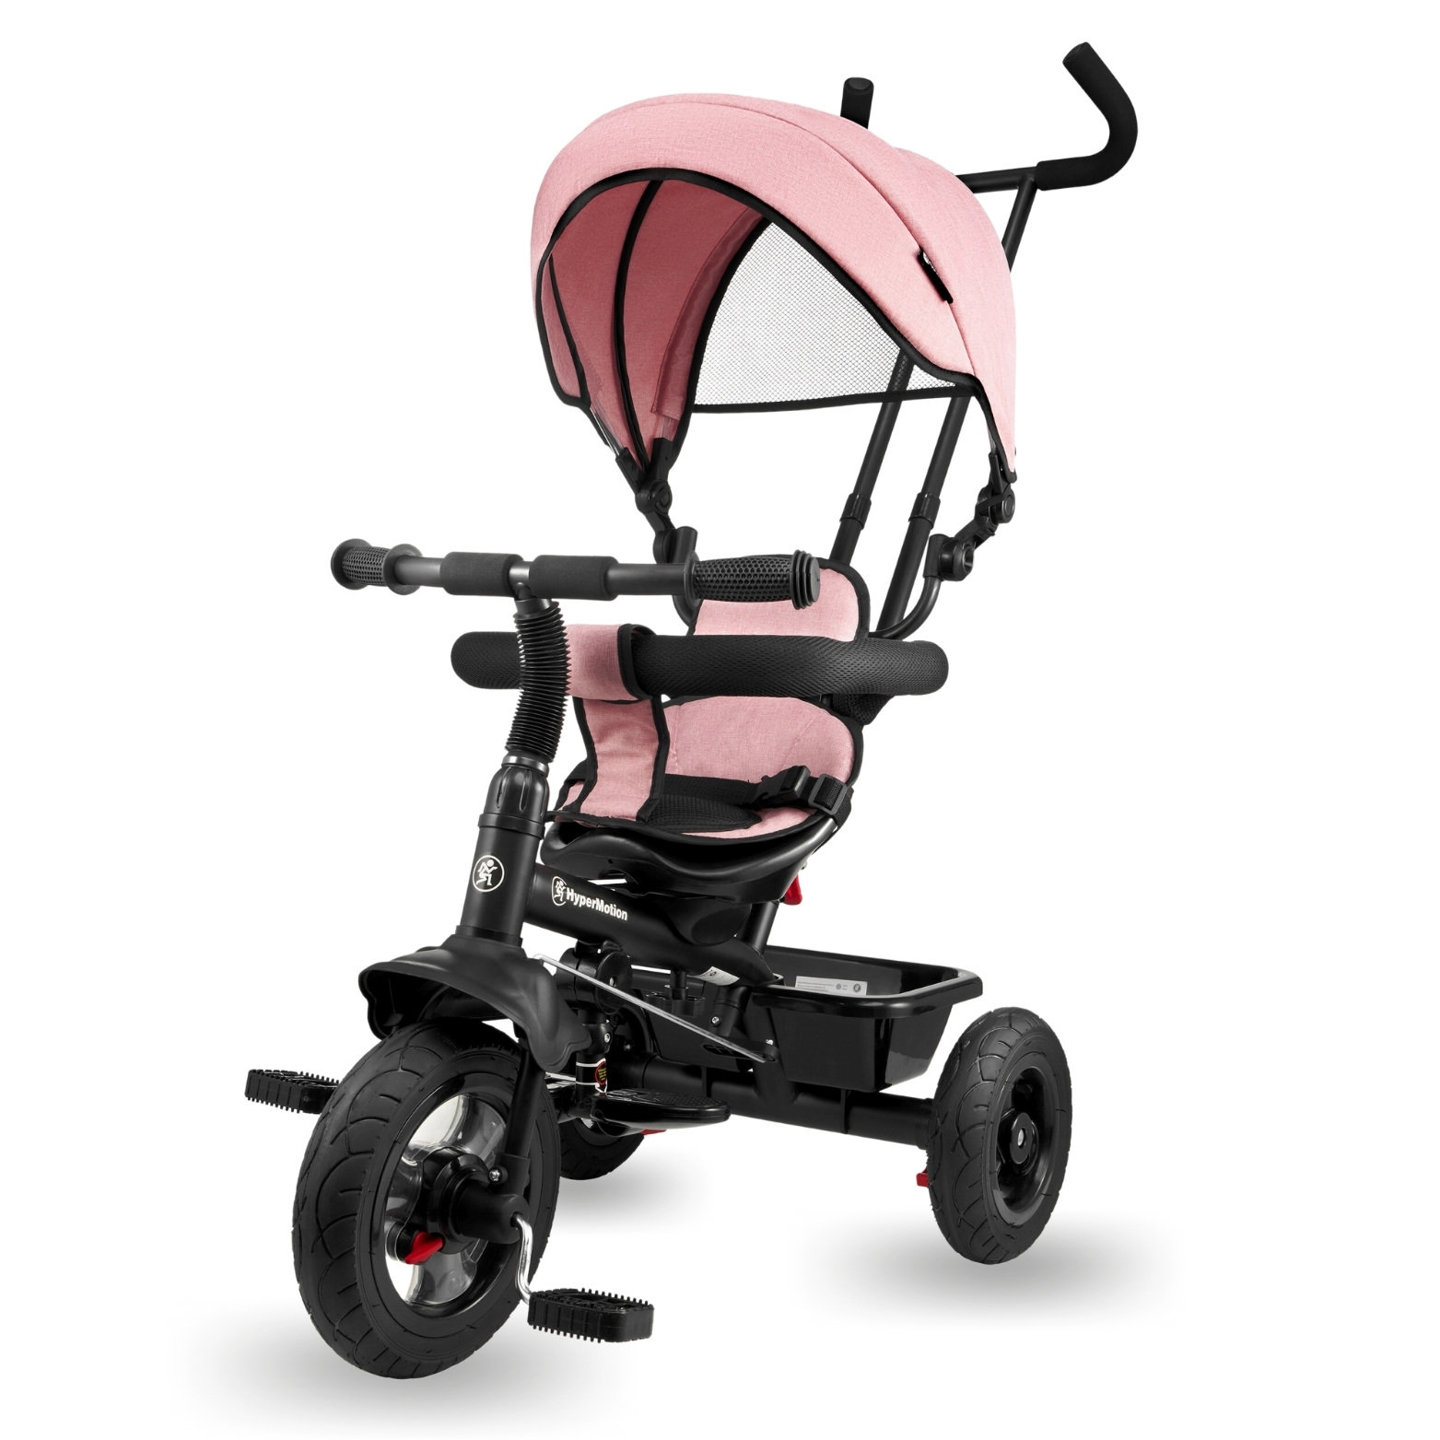 Tricycle for children 1-4 years - TOBI FREY - pink color - swivel - pumped wheels + pusher